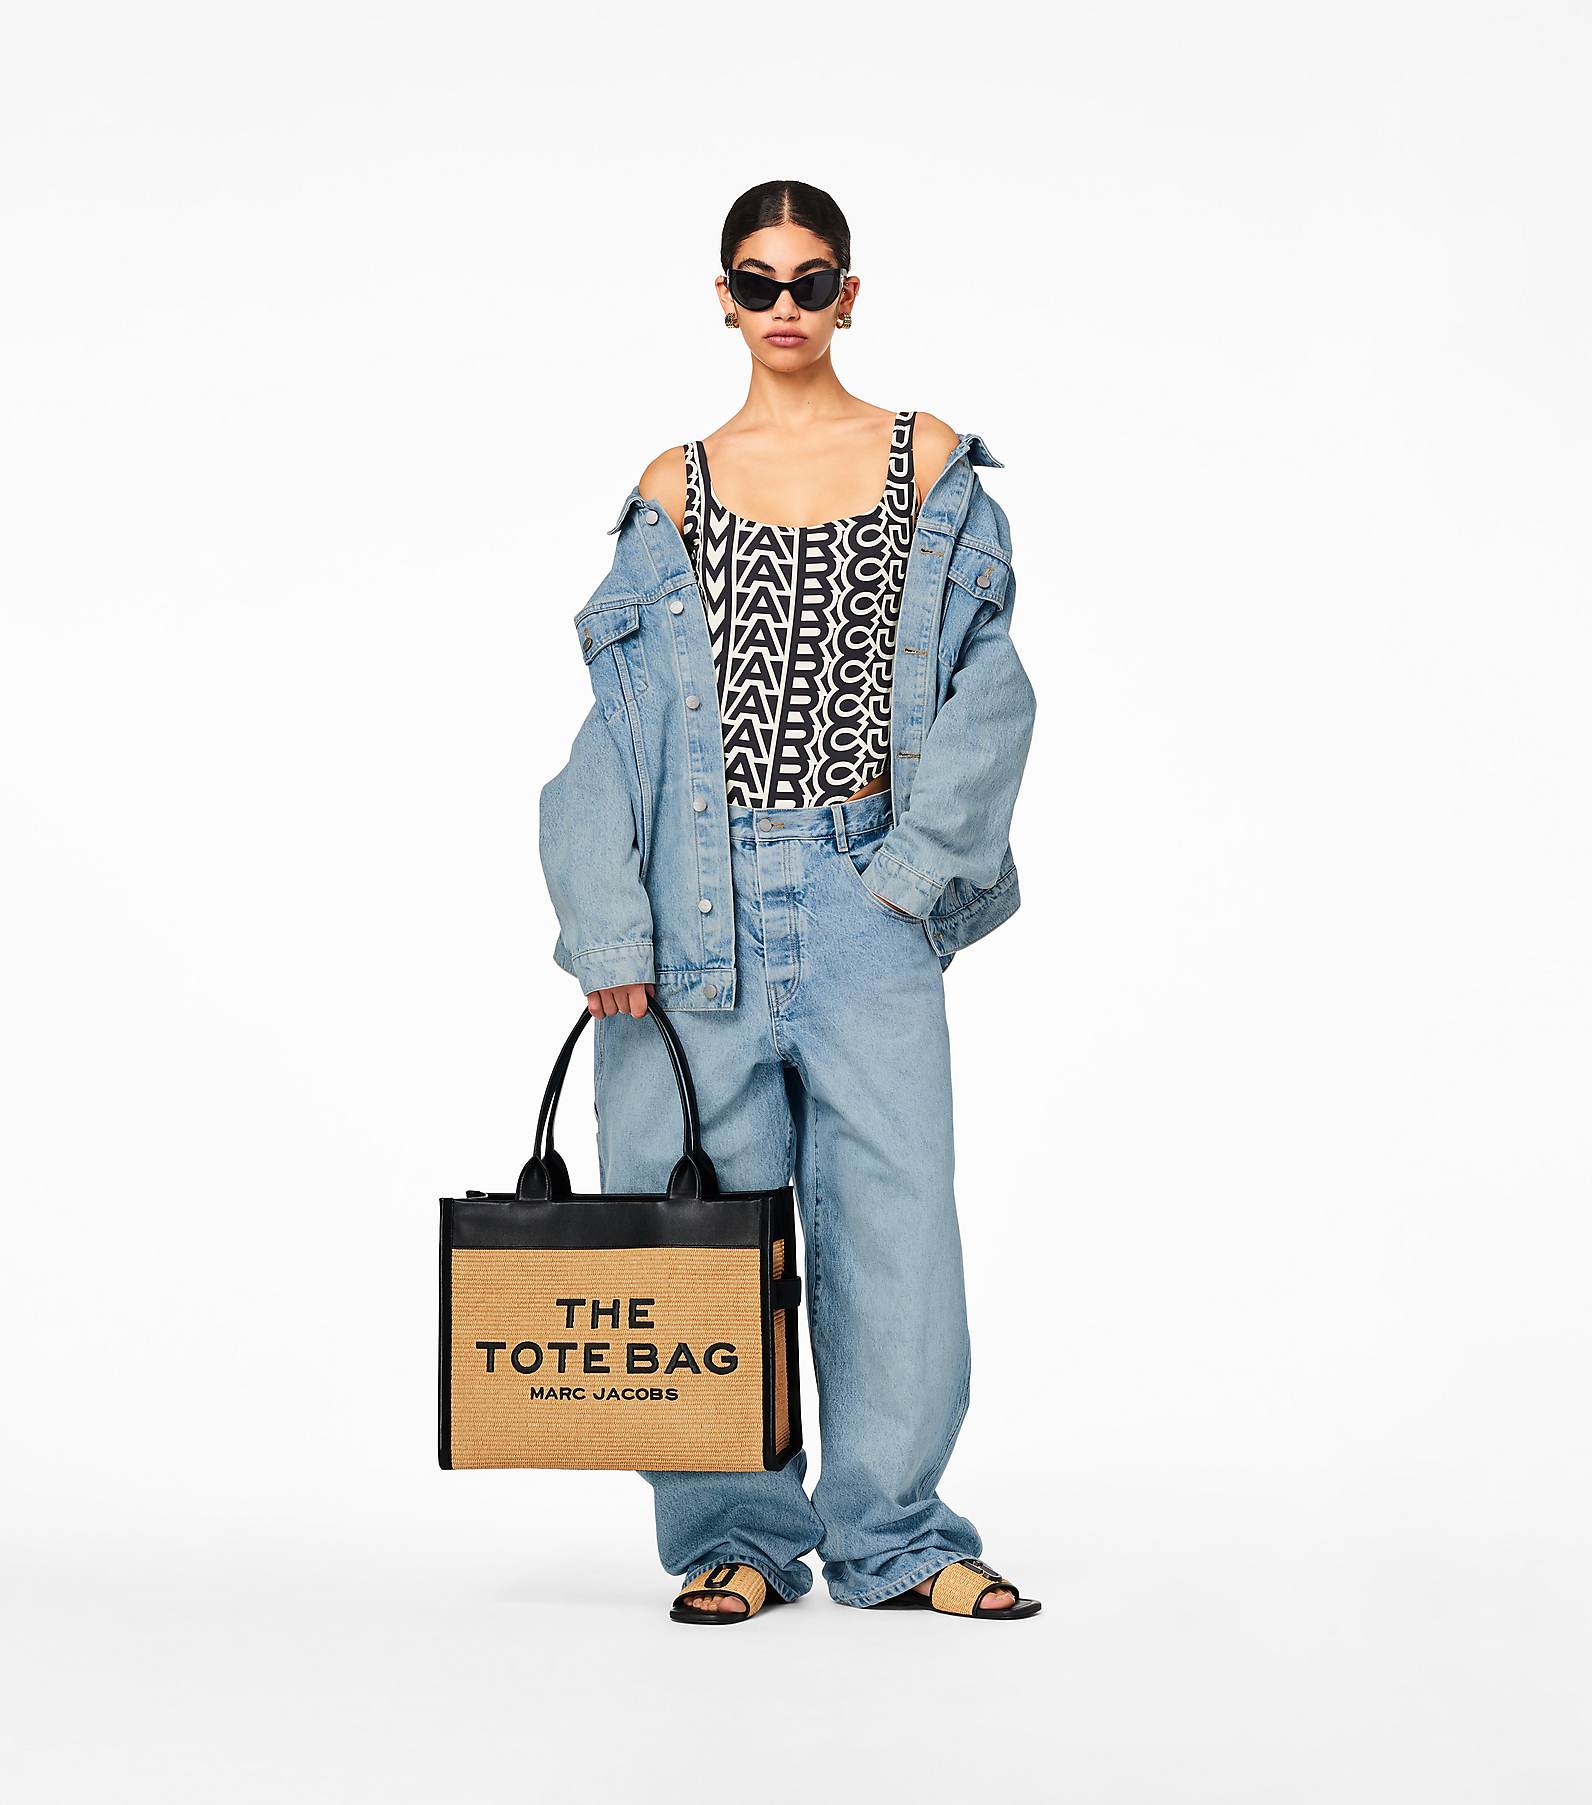 The Woven Medium Tote Bag, Marc Jacobs